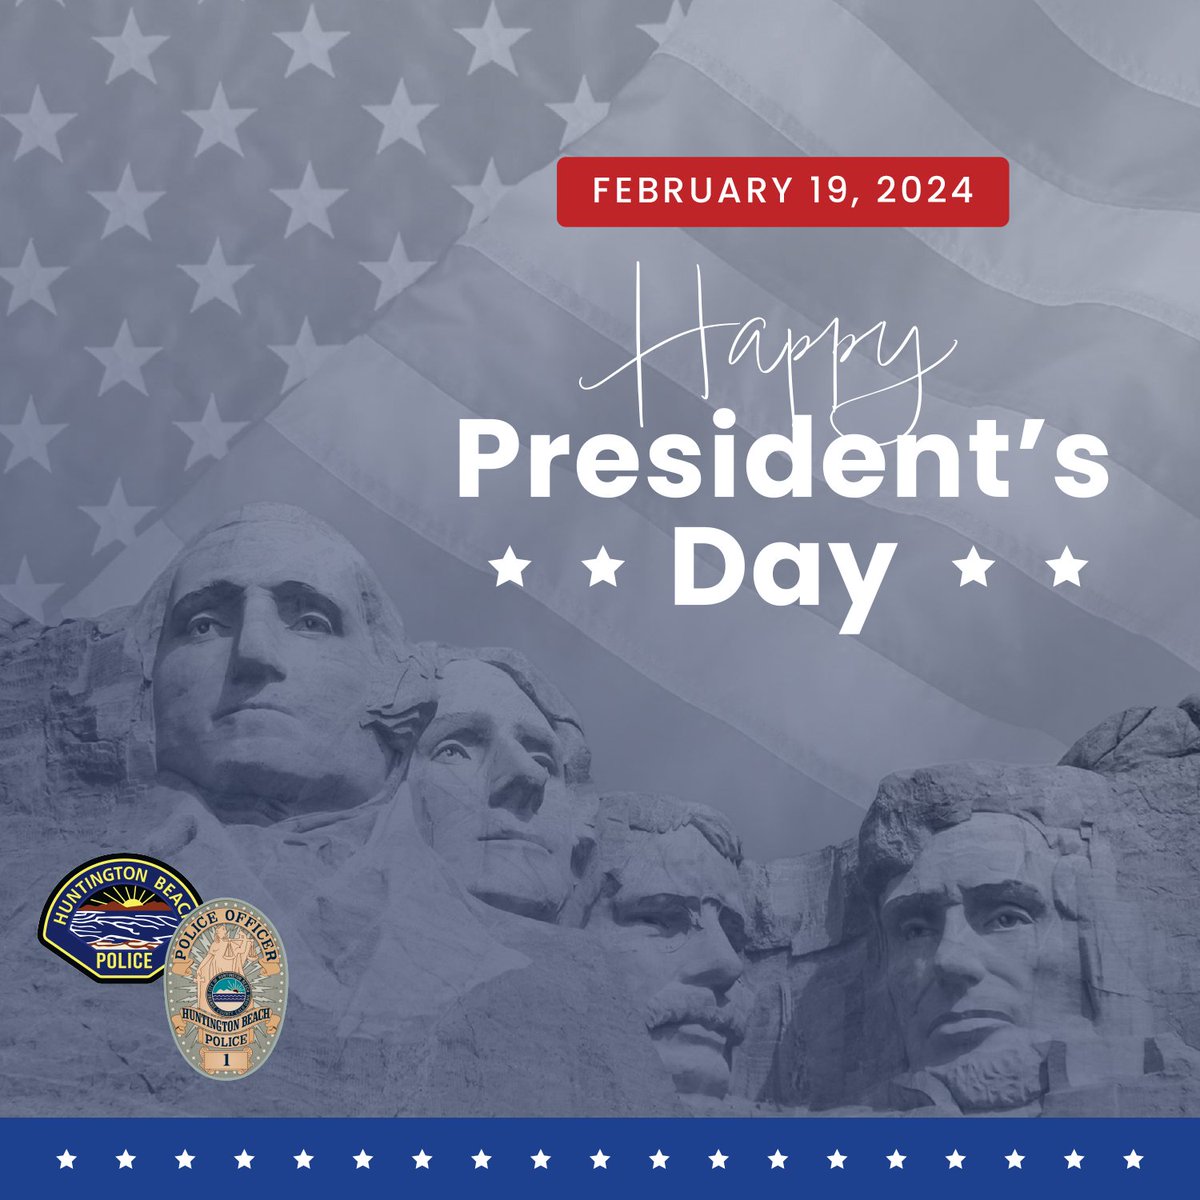 In observance of President’s Day, the HBPD’s front lobby will be closed today, February 19, 2024. Call us at (714) 960-8811 or use the phone (gray) to the right of the front lobby doors for assistance. We wish you and your family a safe and happy President’s Day.